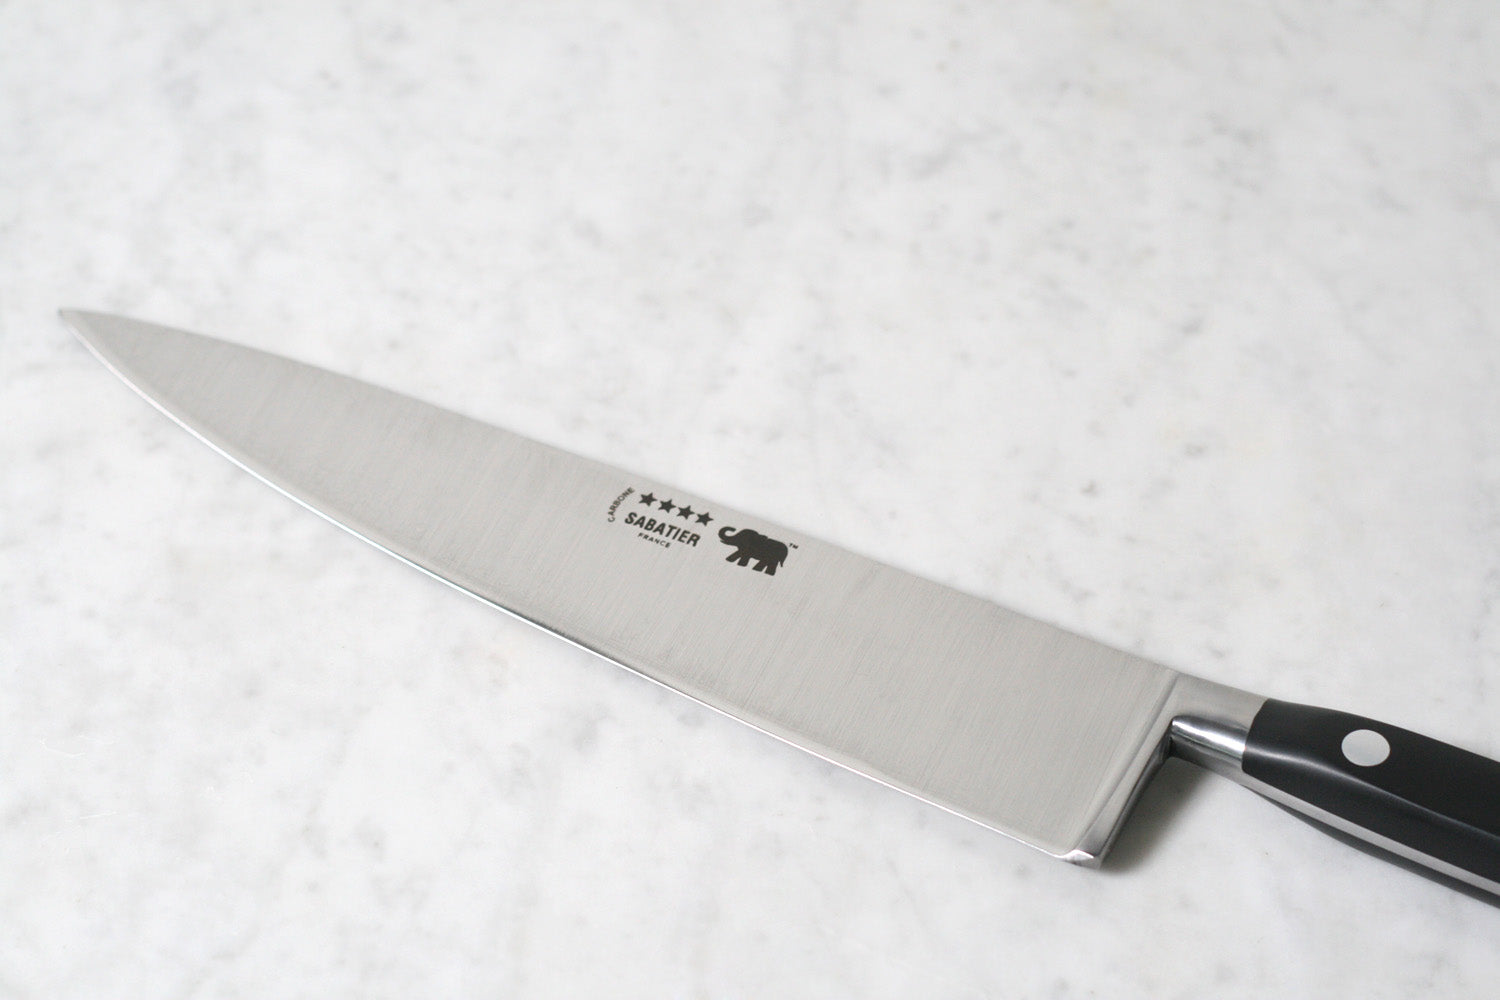 French Chef's Knife